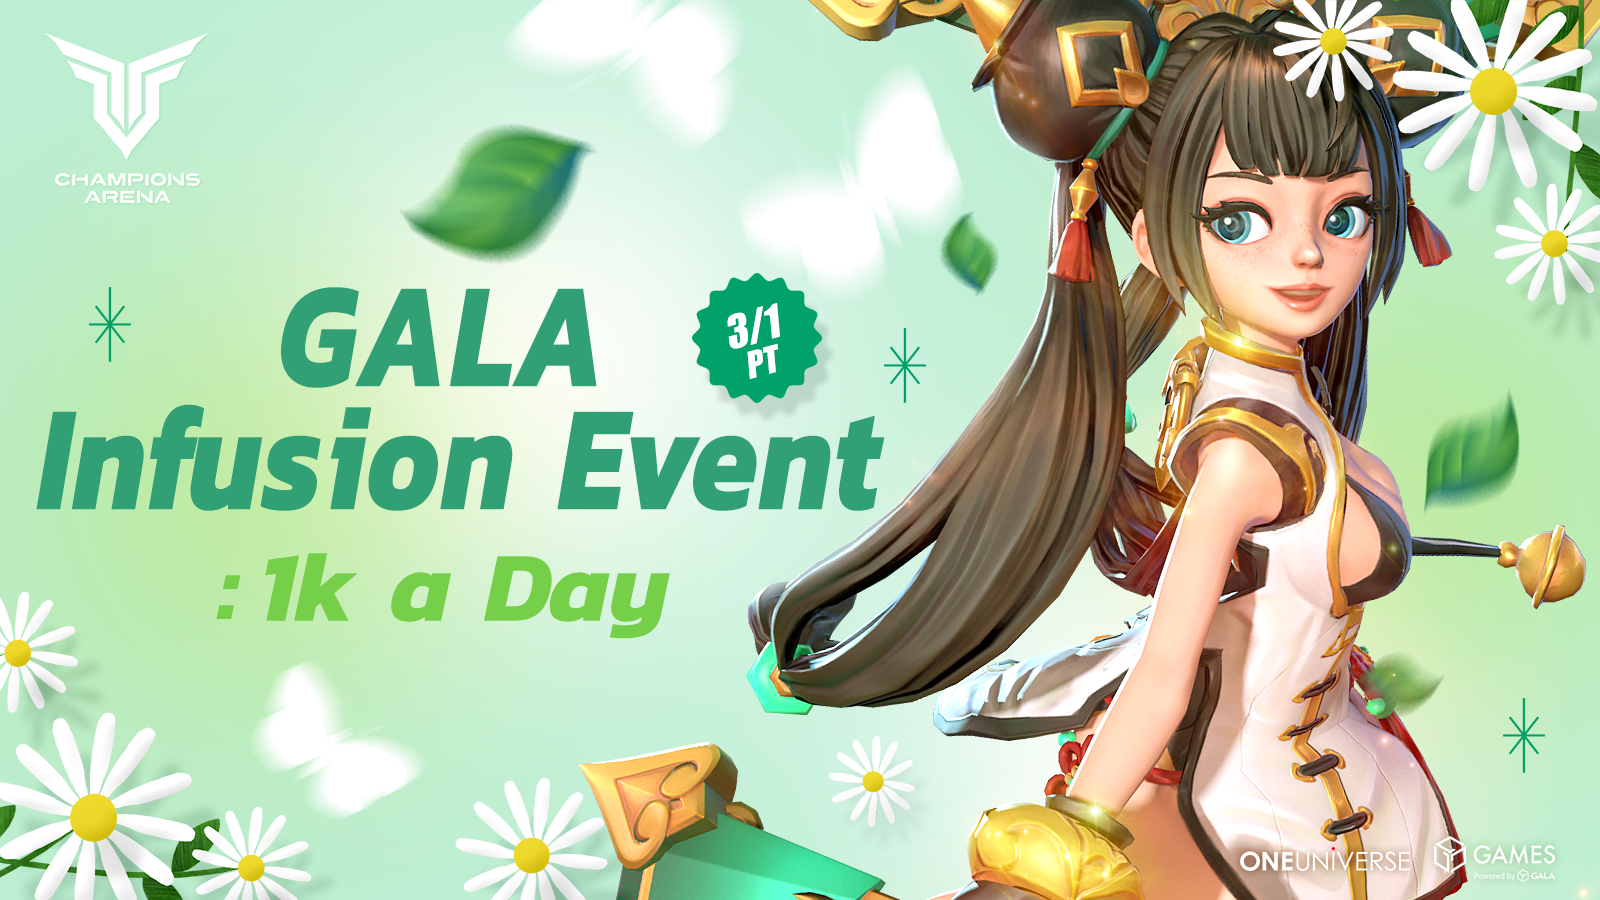 The Champions Arena $GALA infusion event is adding $1k each day for a week to the game's rewards!